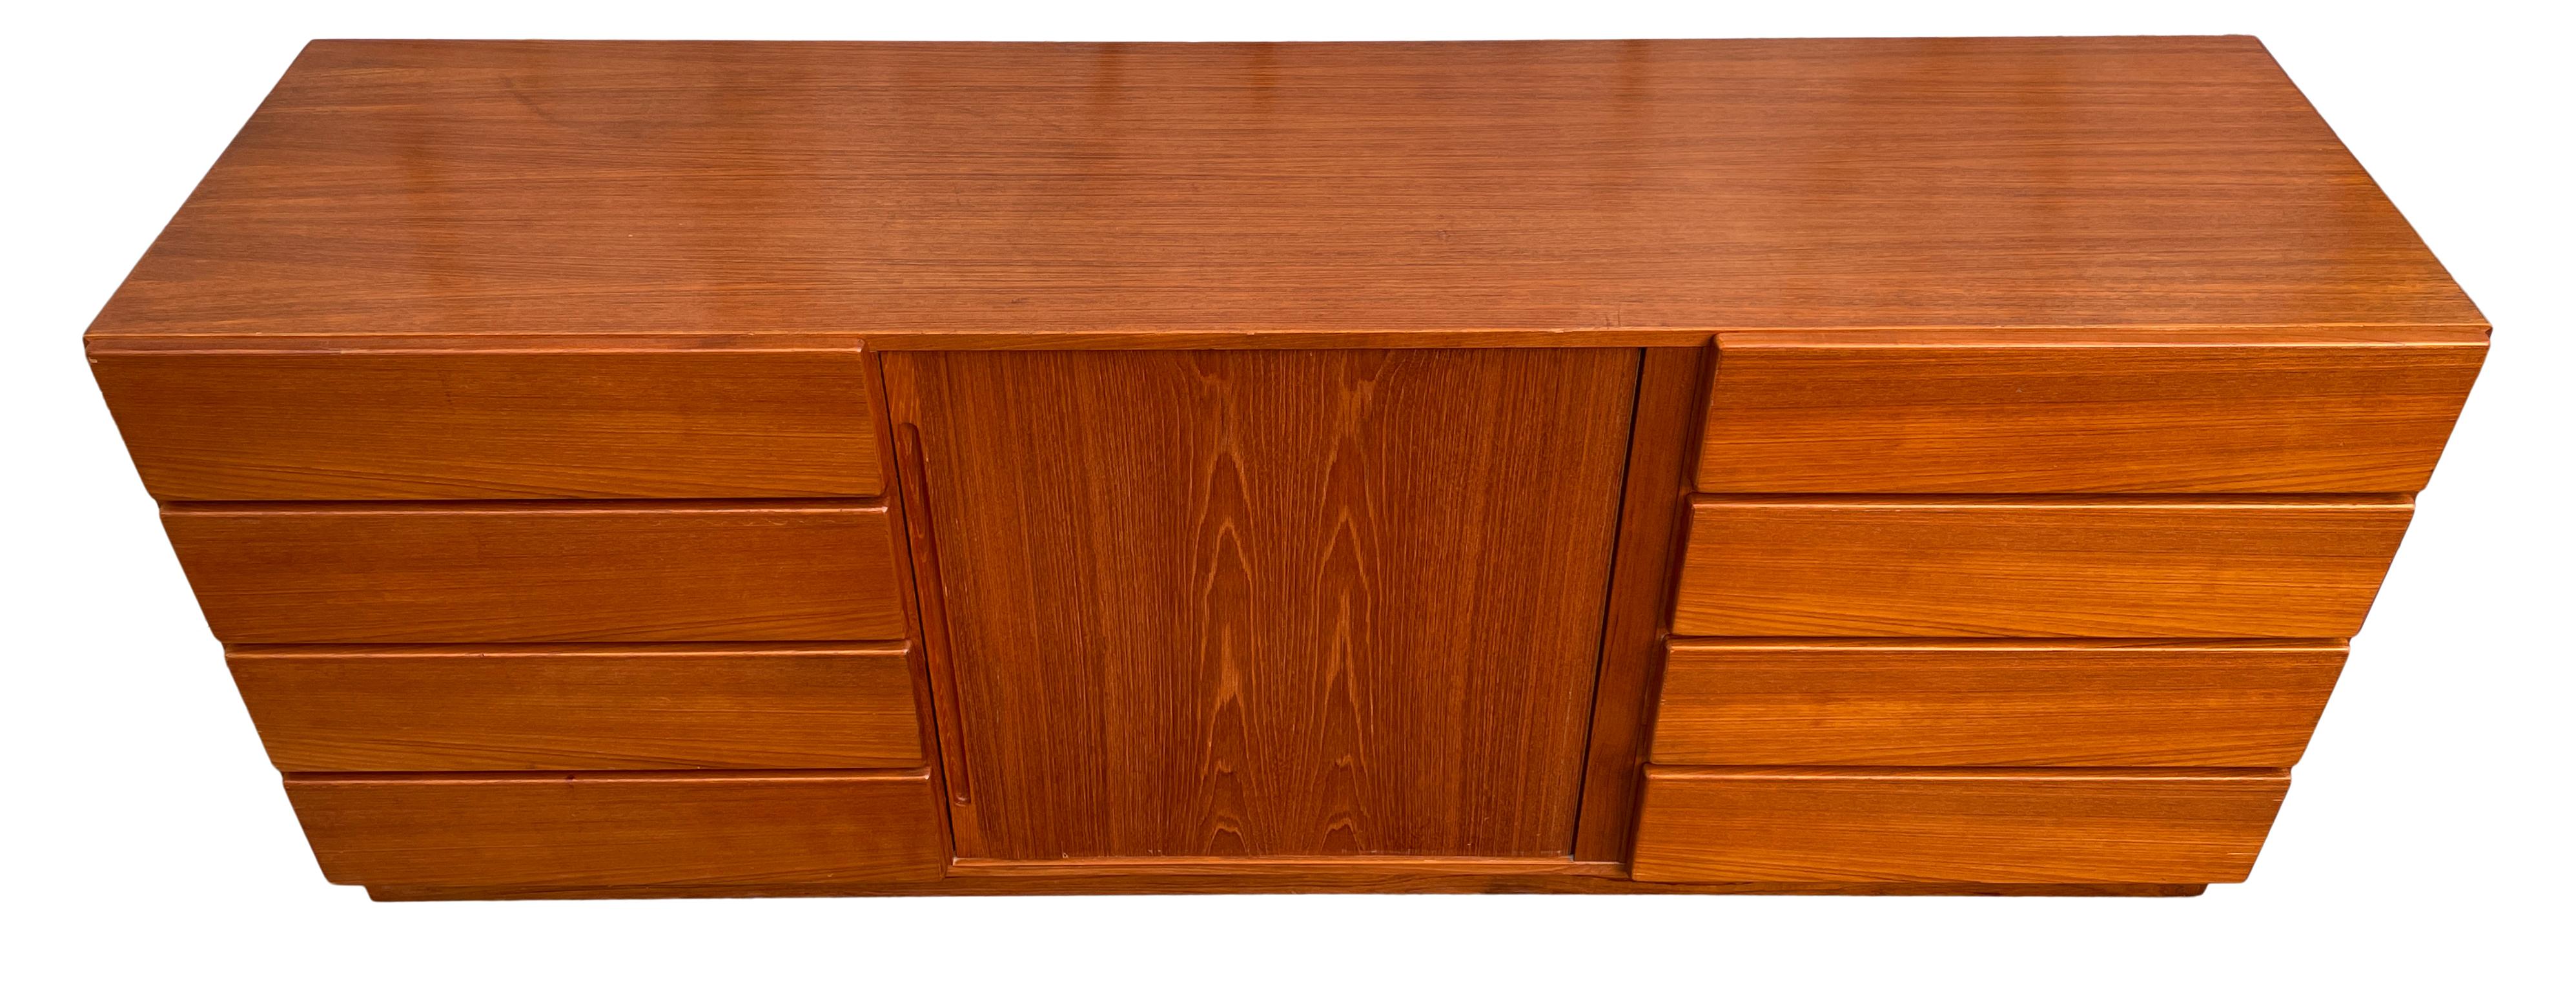 Mid-century Danish modern Tambour door credenza dresser with 8 drawers front drawers. Light teak credenza or dresser with front sliding Tambour doors behind the doors are 3 teak drawers with 2 adjustable shelves. All drawers are clean and slide